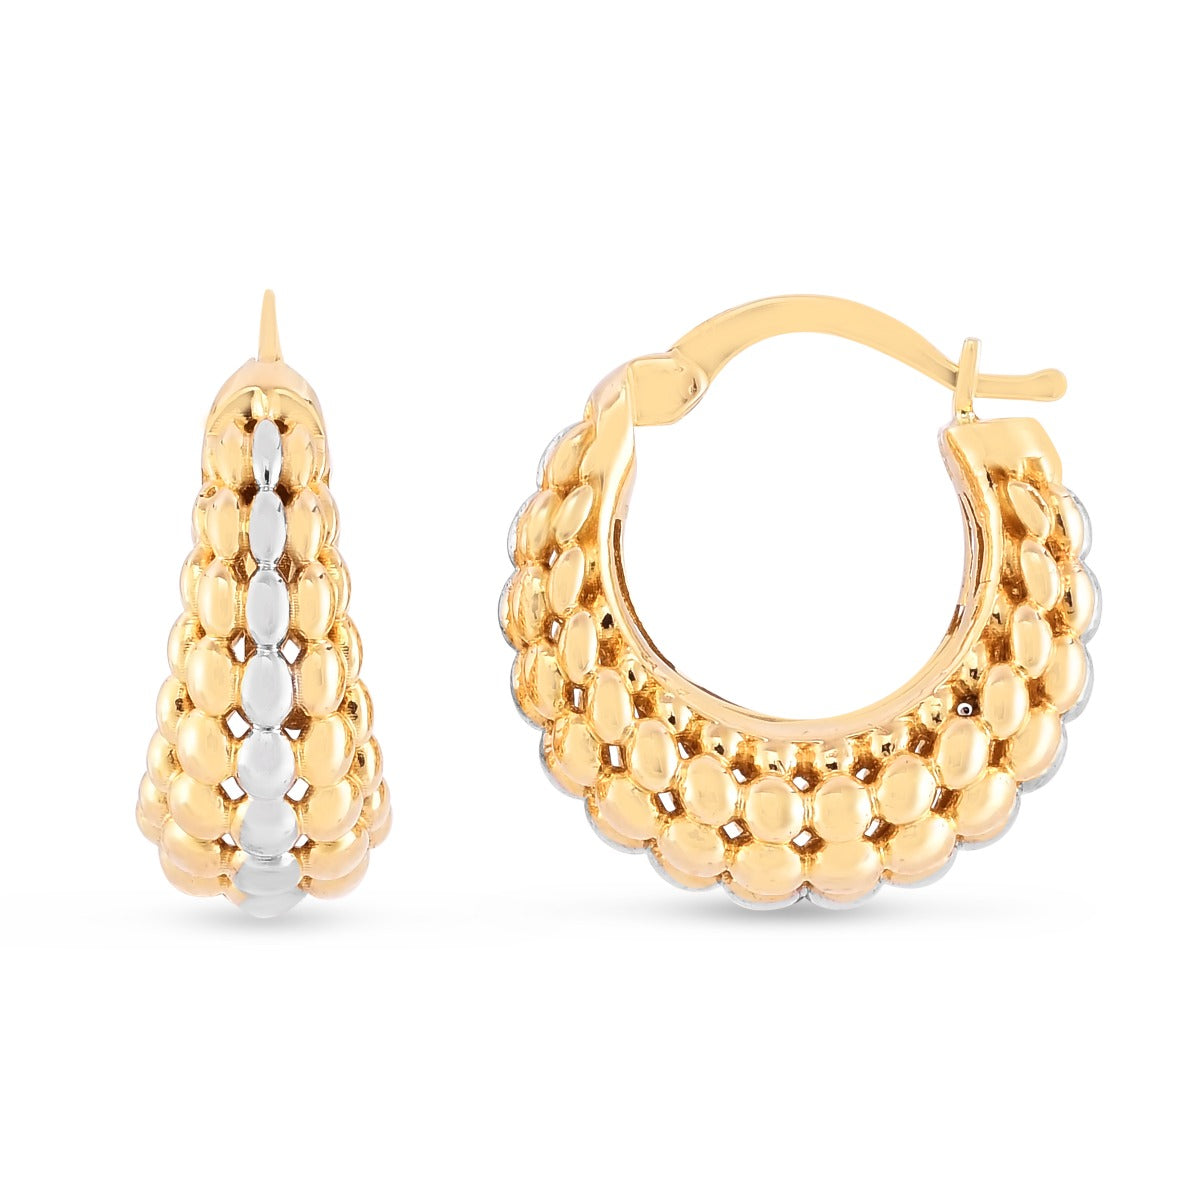 14K Two-tone Gold Popcorn Graduated Hoops with Hinged Closure.